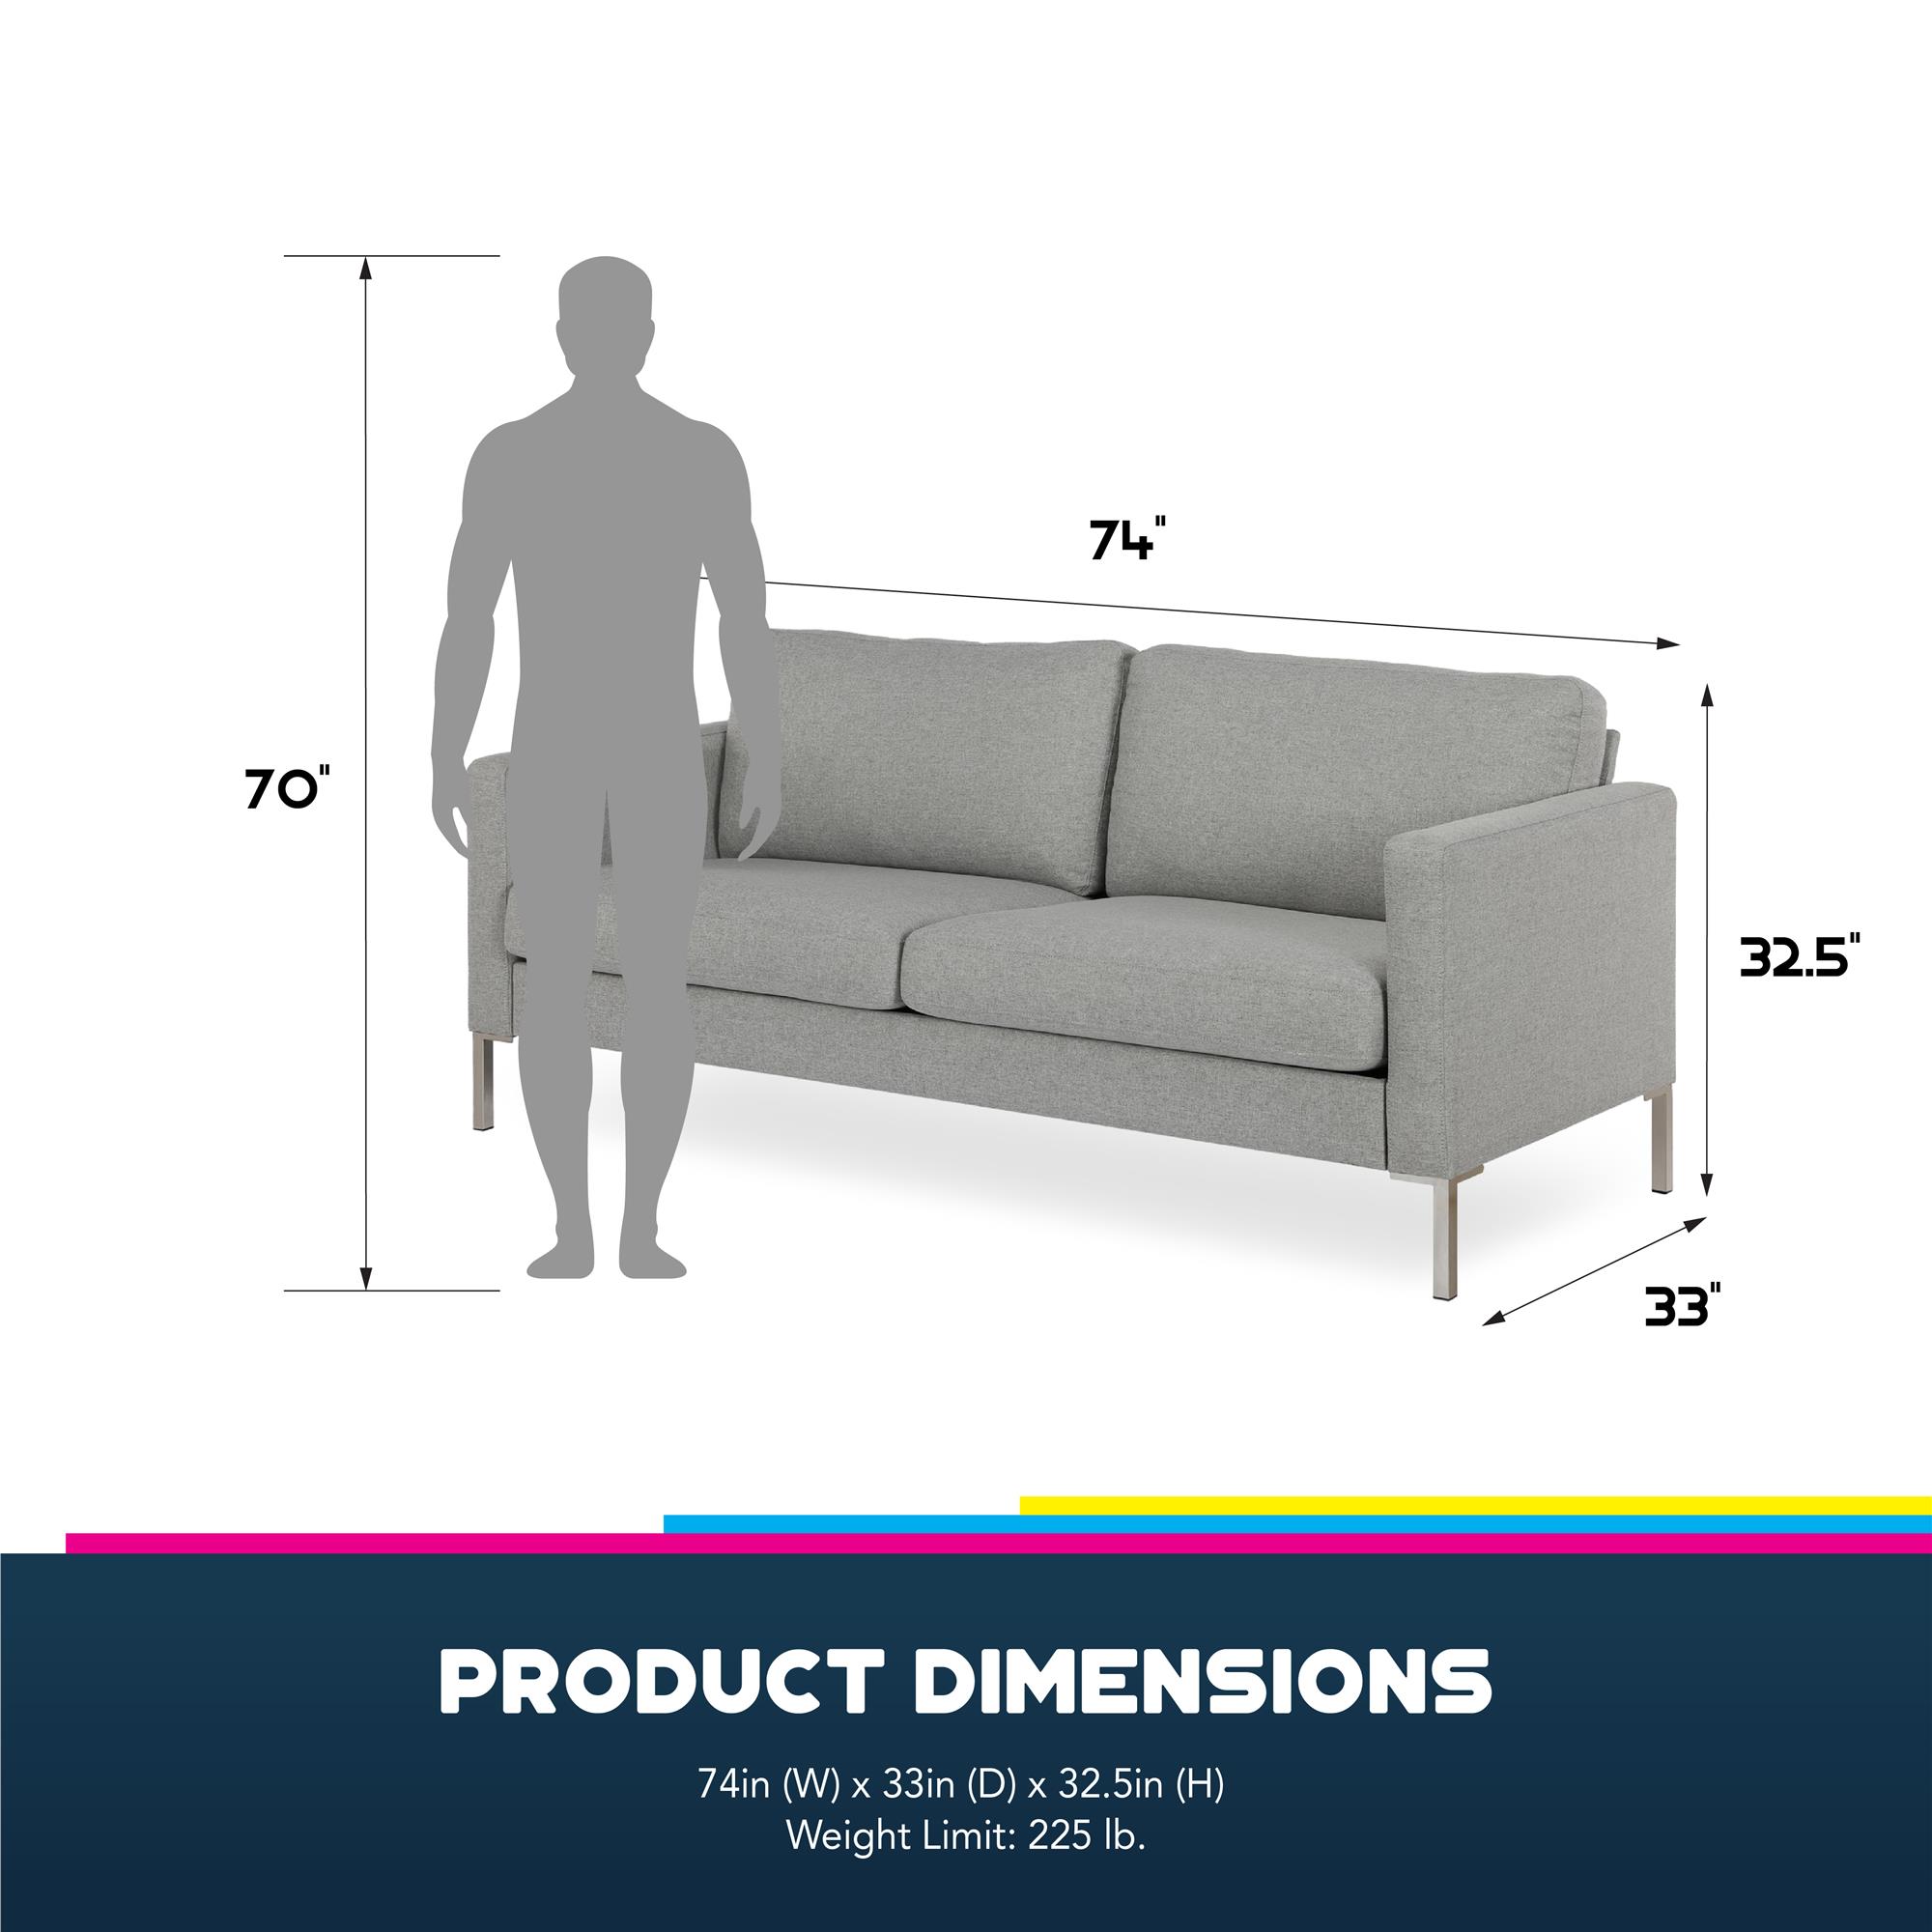 DHP Lexington Modern Sofa & Couch, Living Room Furniture, Gray Linen - image 8 of 15